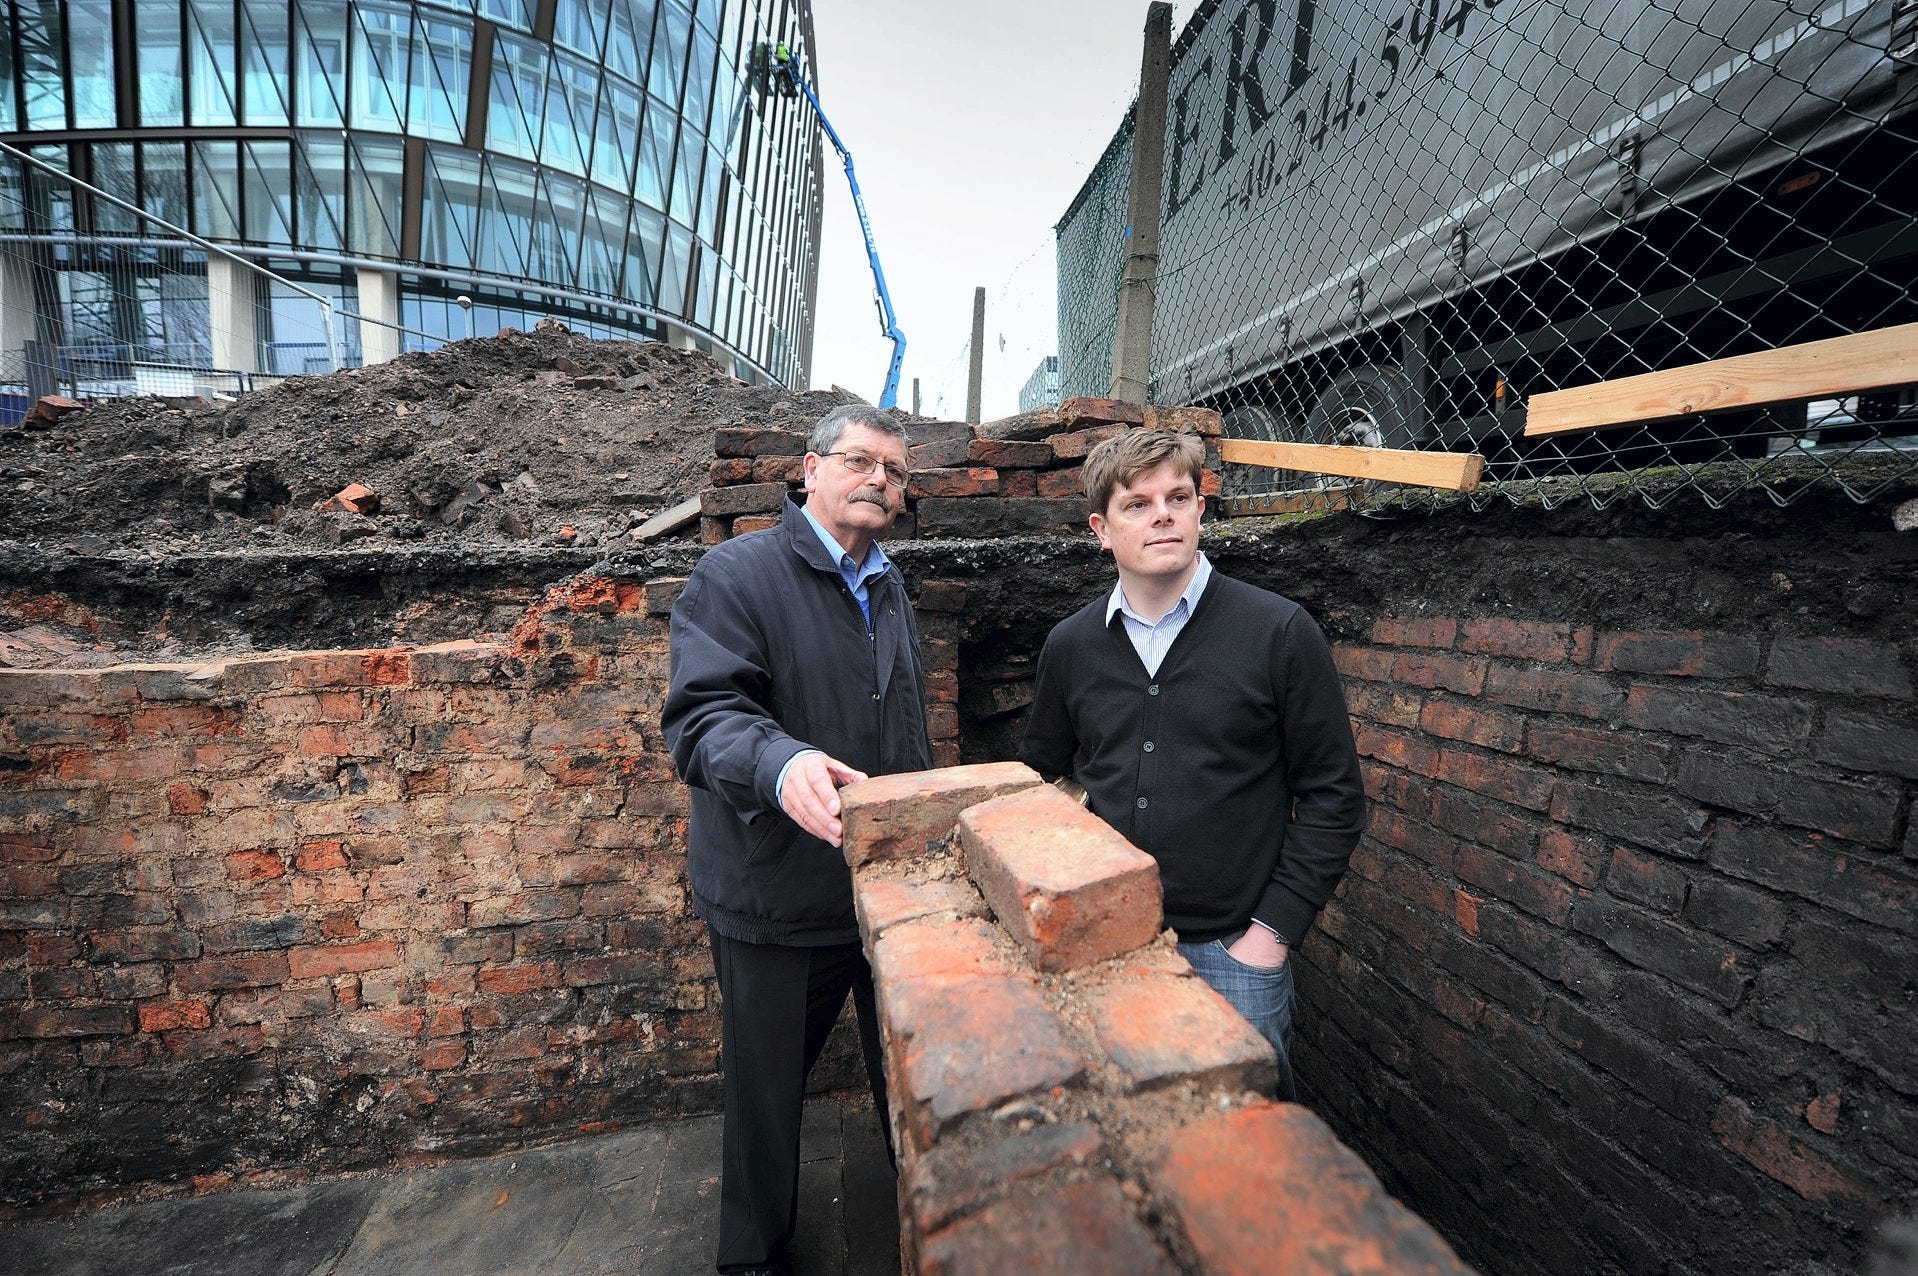 Two men below groundlevel in a brick dig from the 19th century.